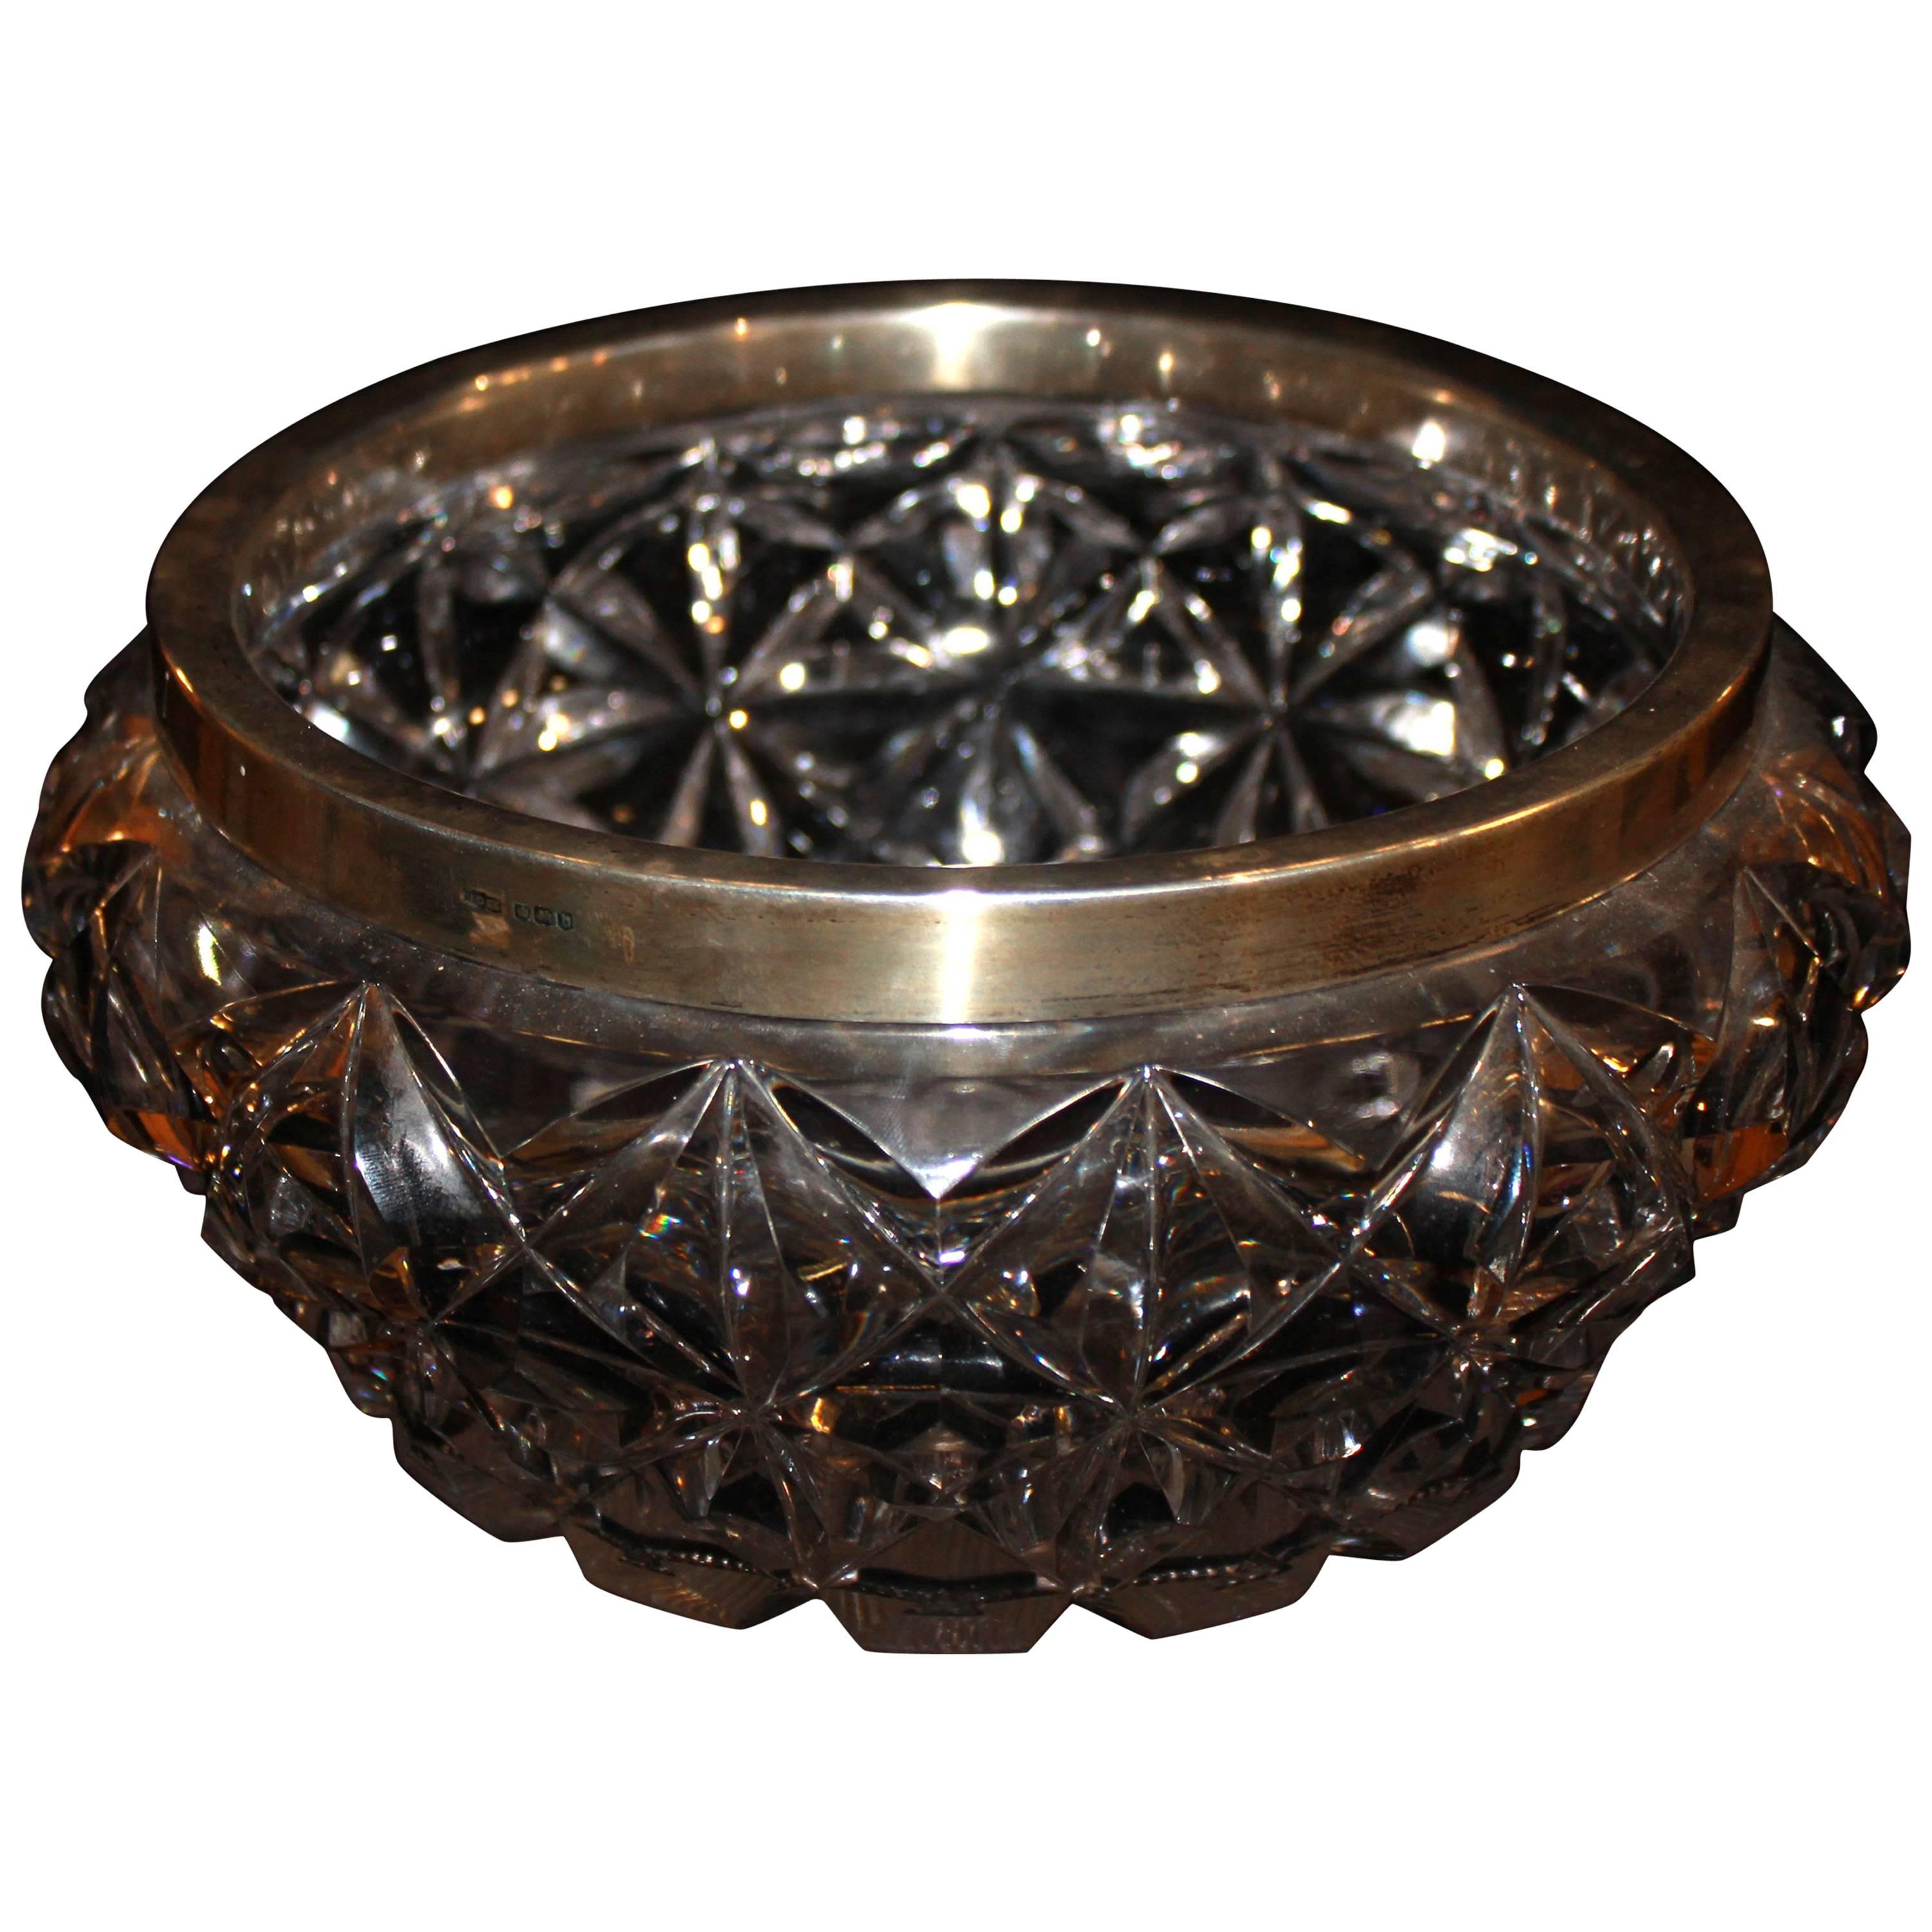 James Dixon & Co, Early 20th Century Silver and Cut Lead Crystal Bowl